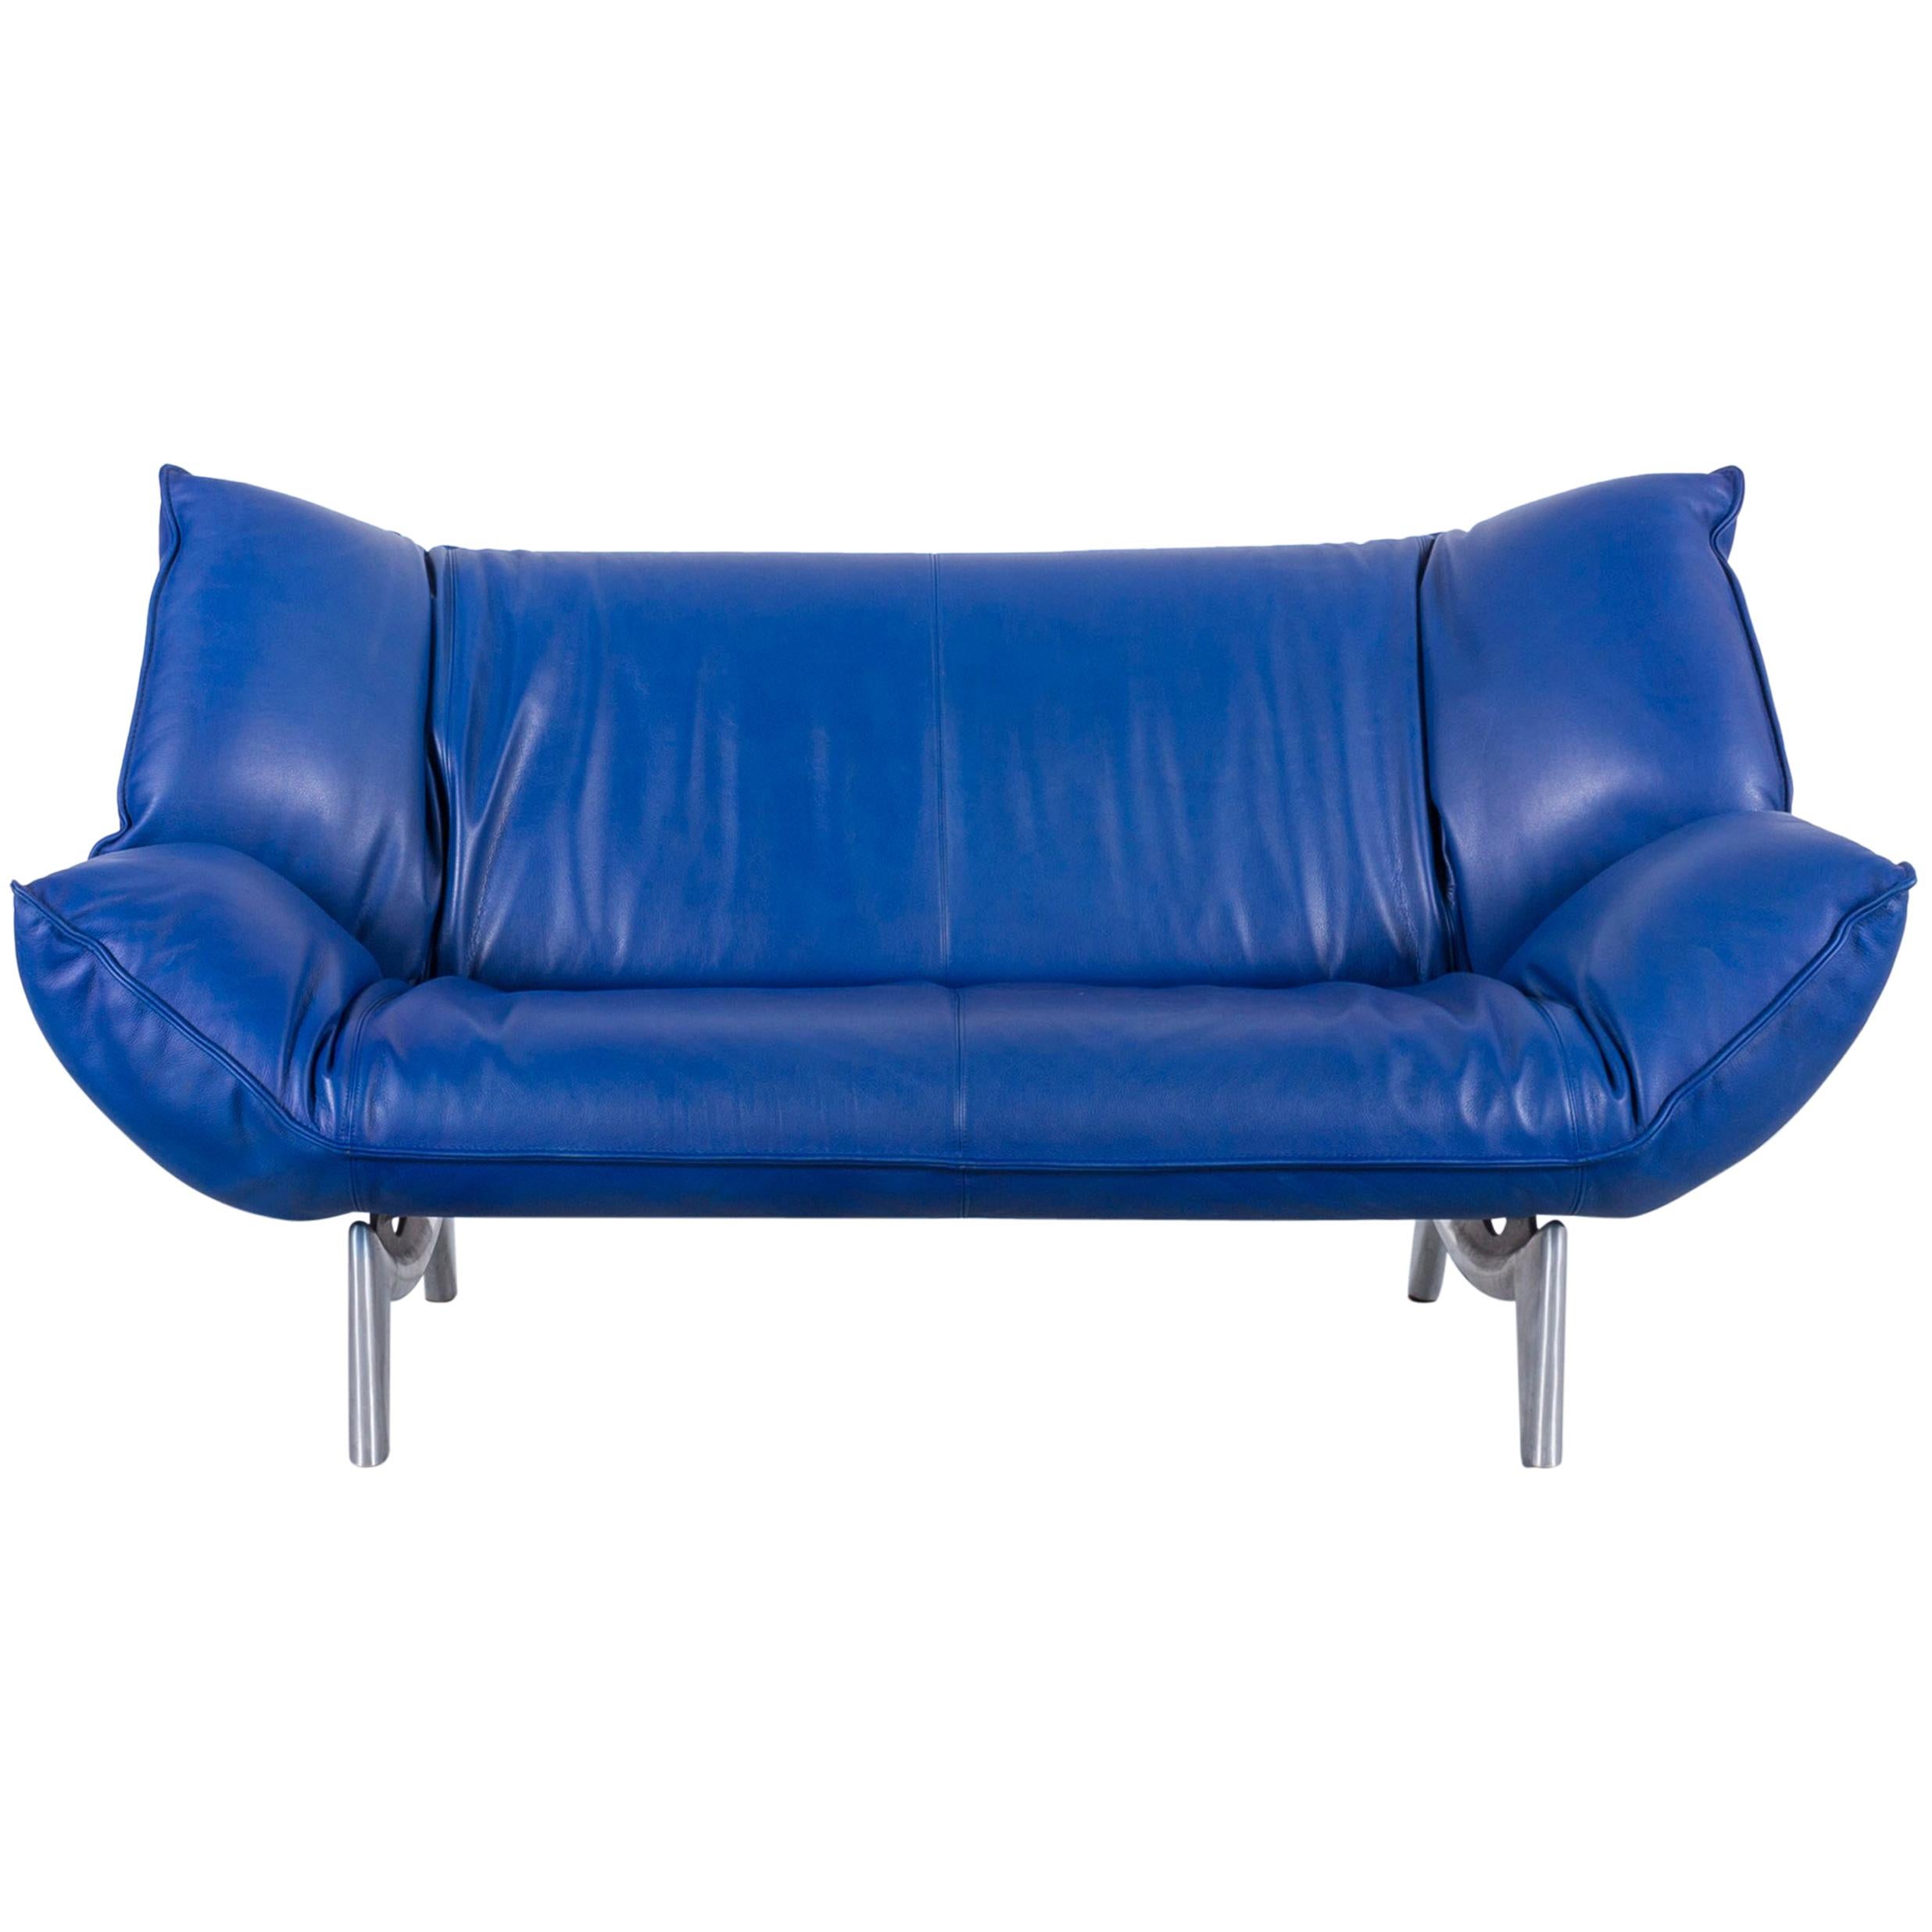 Leolux Tango Designer Sofa Leather Blue Two-Seat Couch Modern For Sale